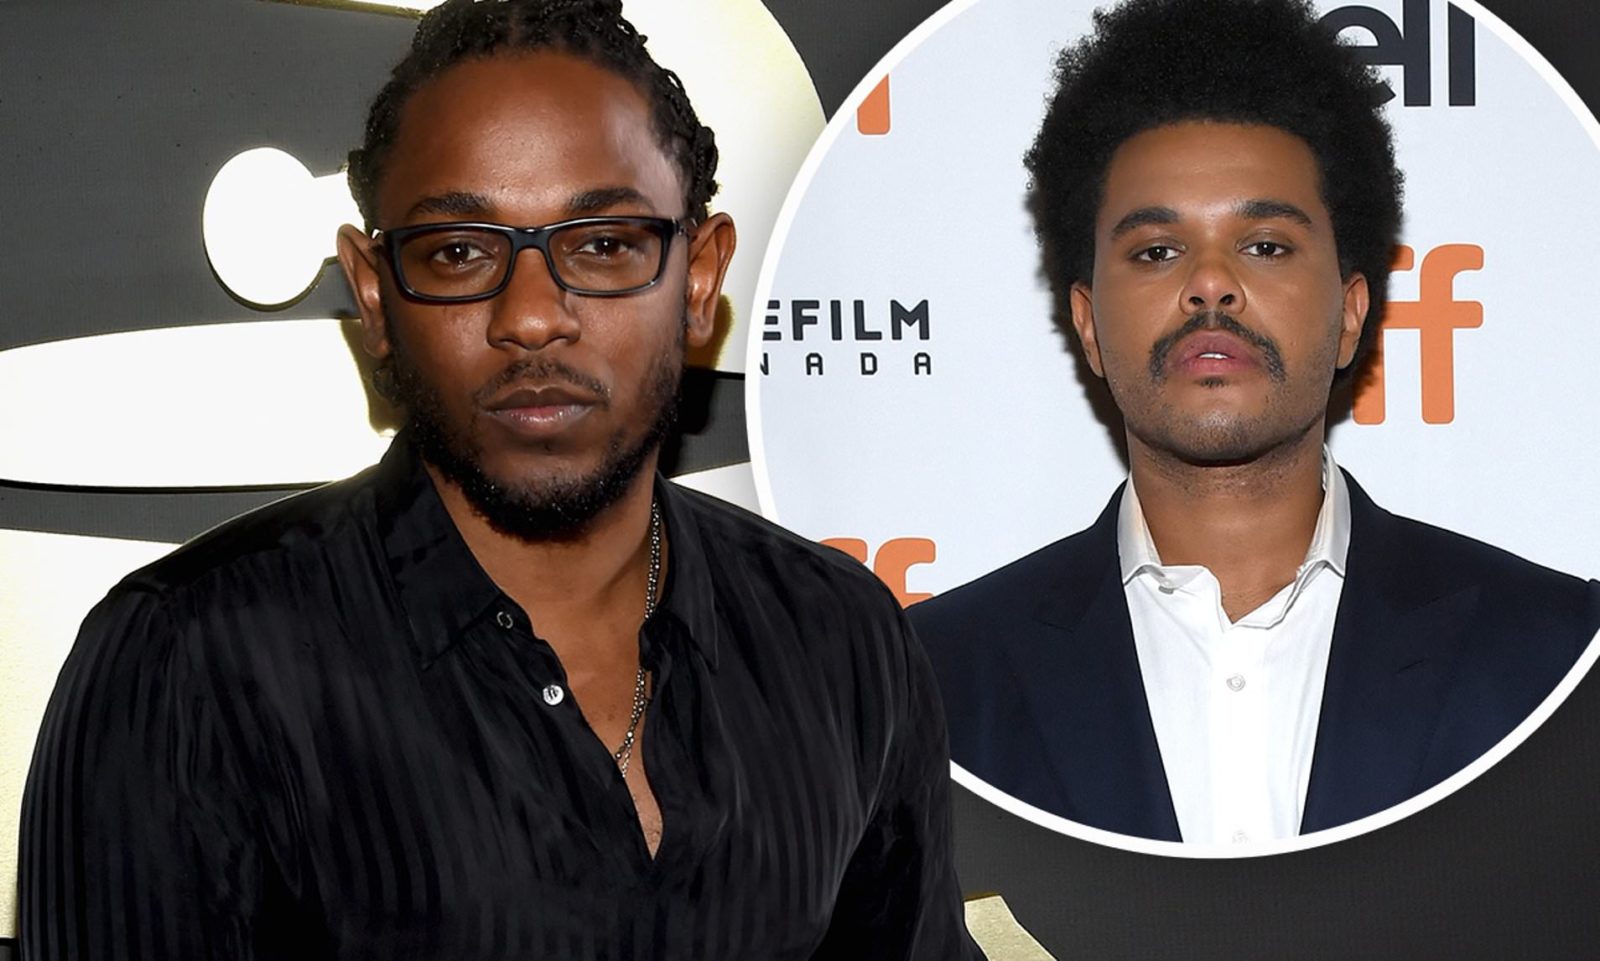 Yeasayer Accuses The Weeknd & Kendrick Lamar For ‘Black Panther’ Song